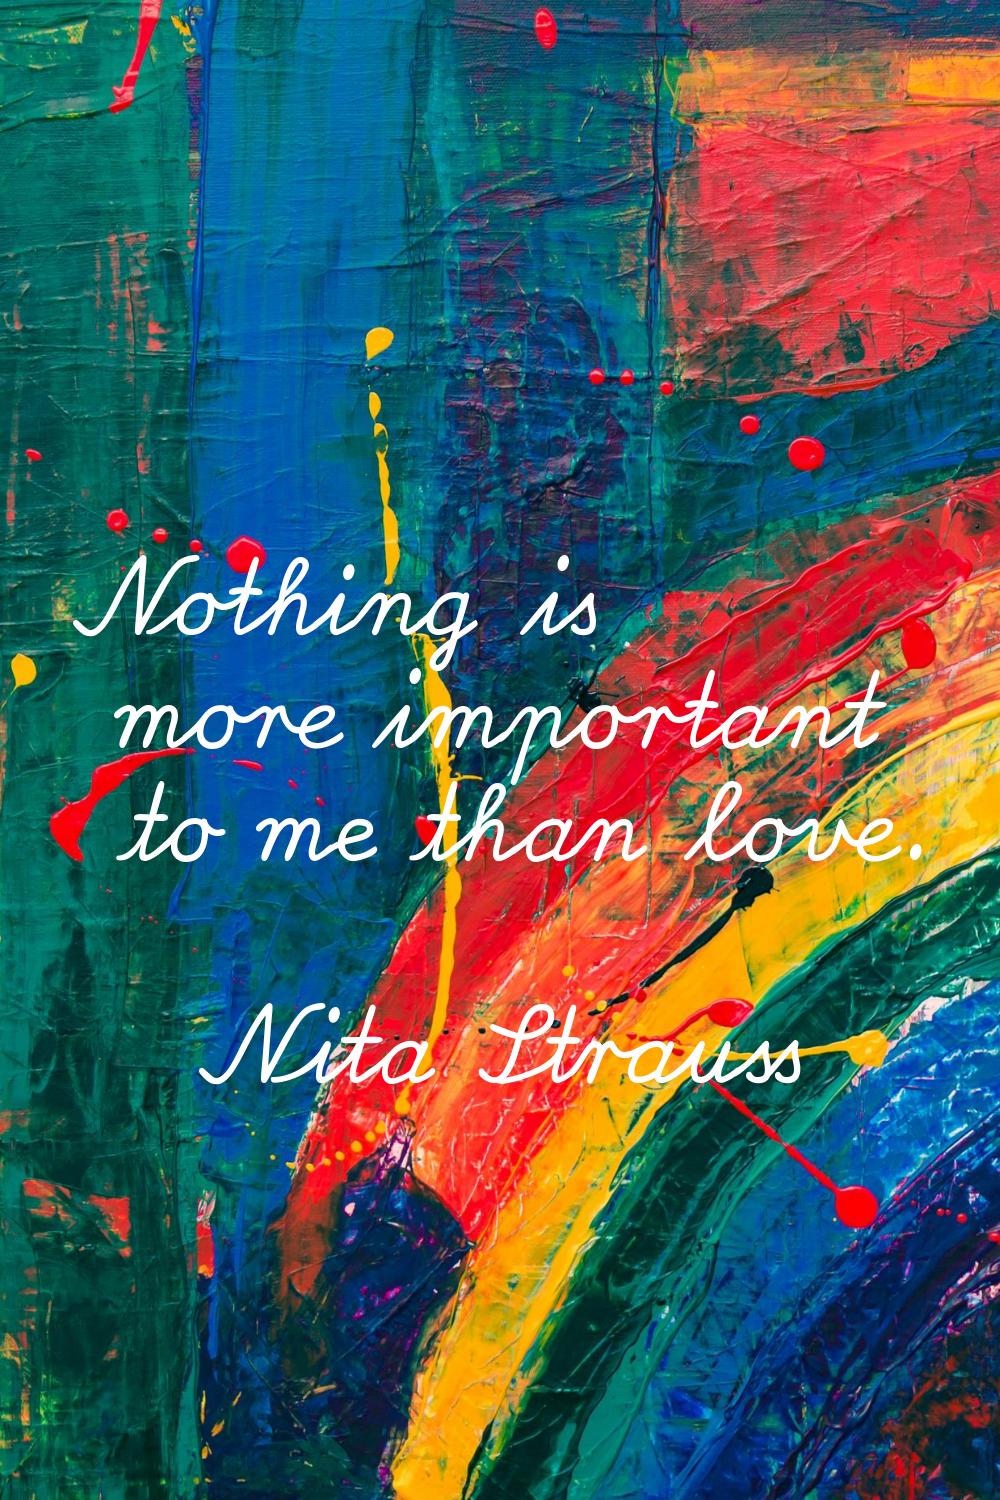 Nothing is more important to me than love.